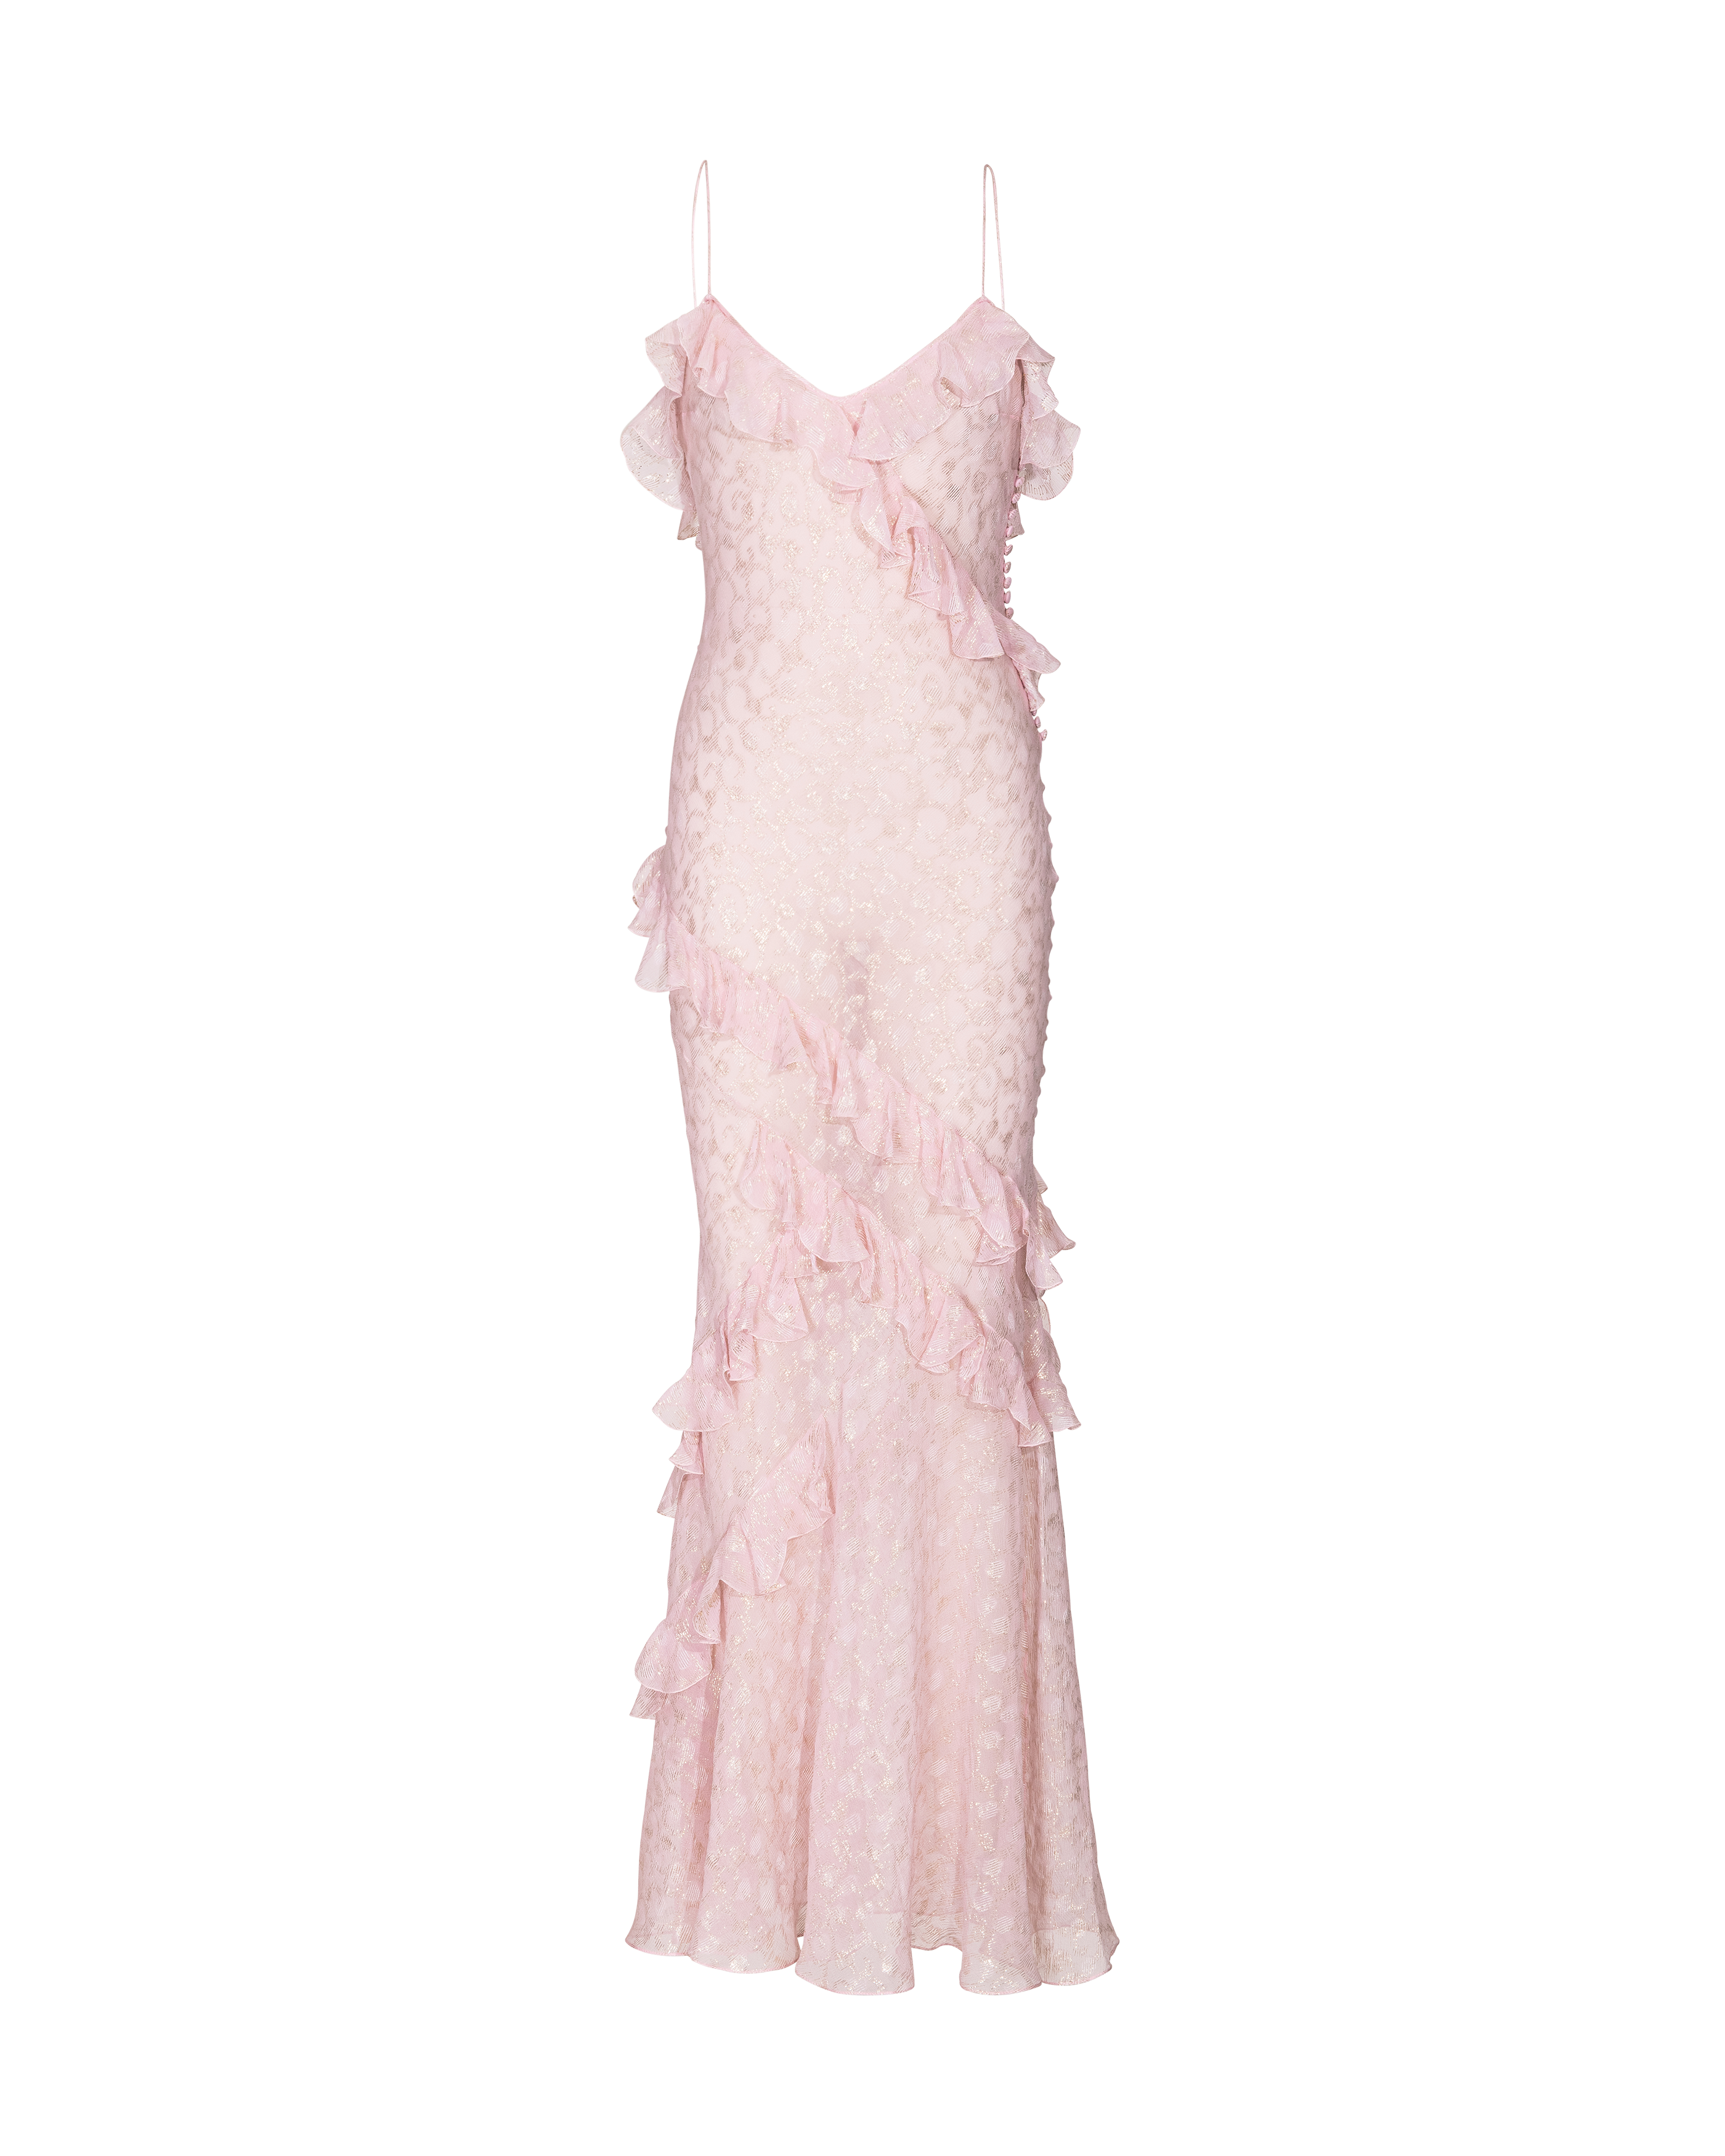 S/S 2004 Sheer Pink and Gold Ruffle Gown